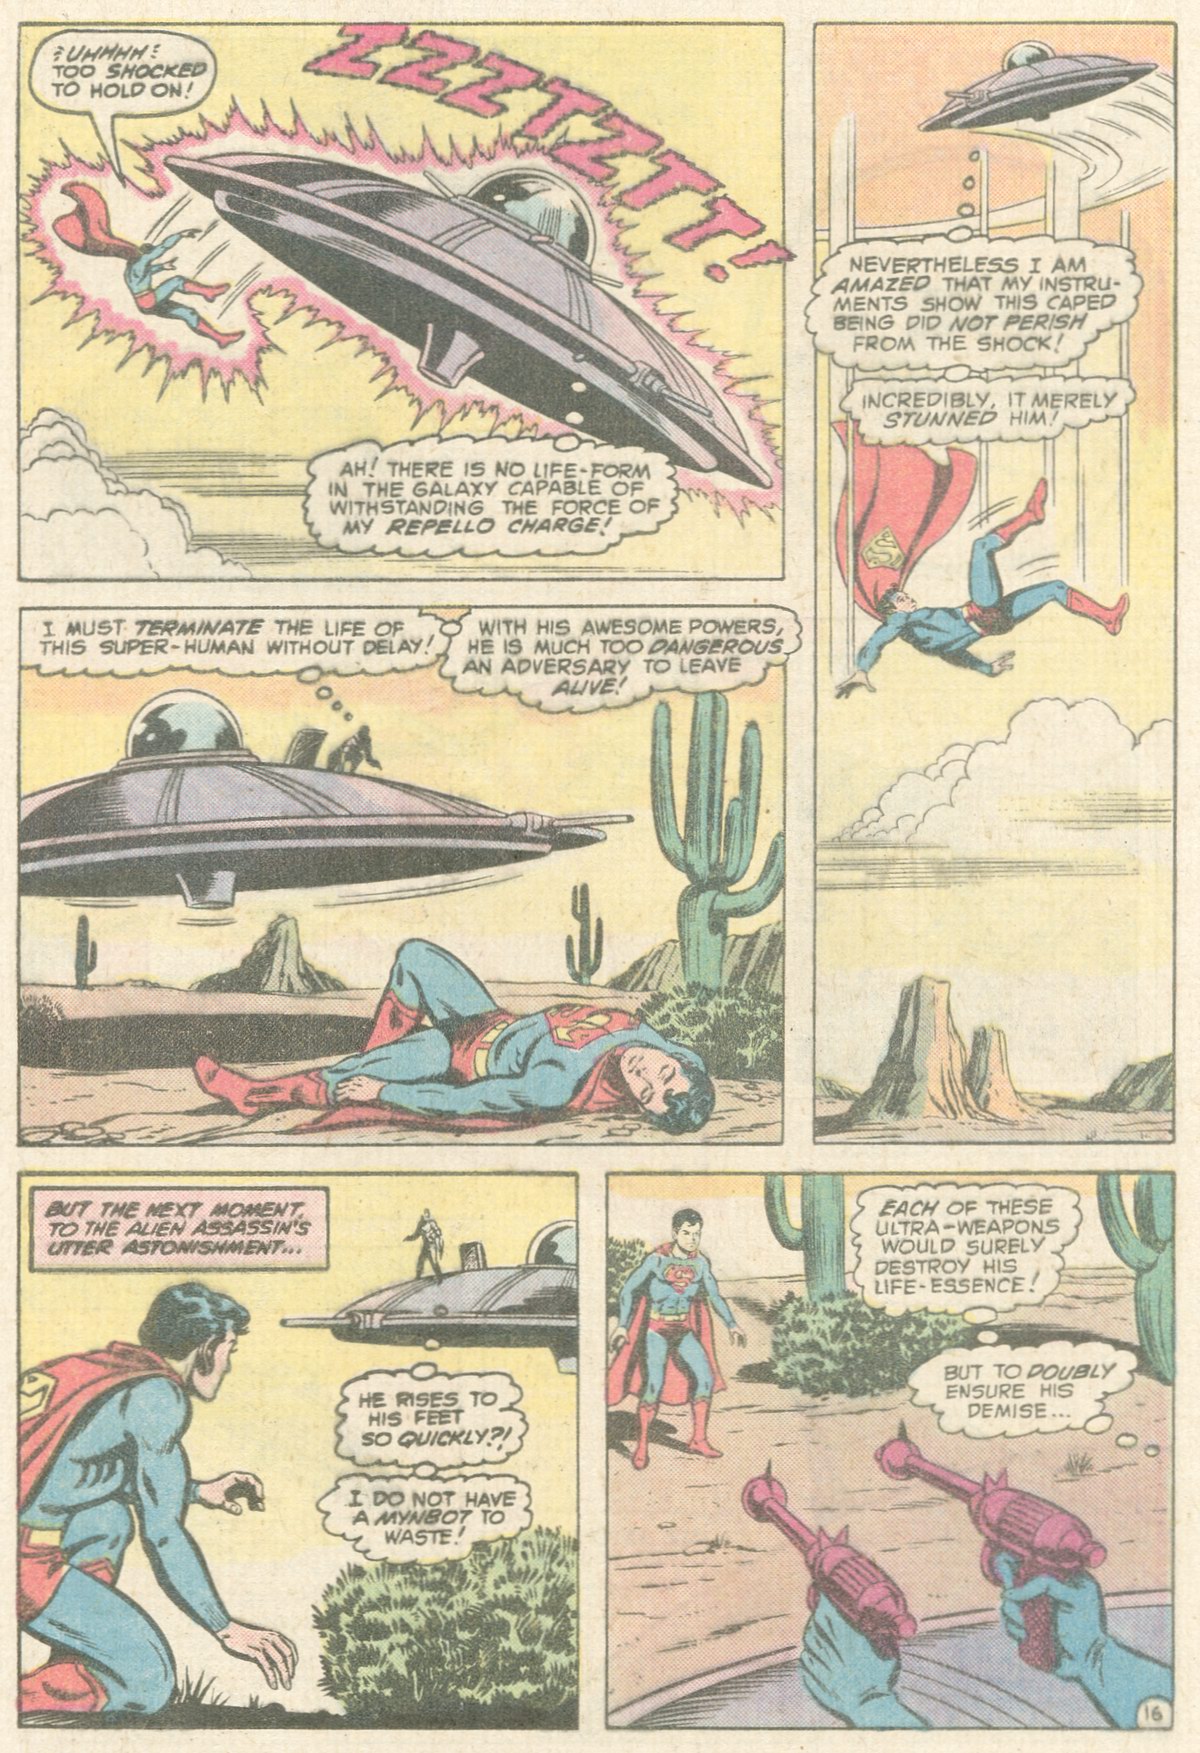 The New Adventures of Superboy 23 Page 16